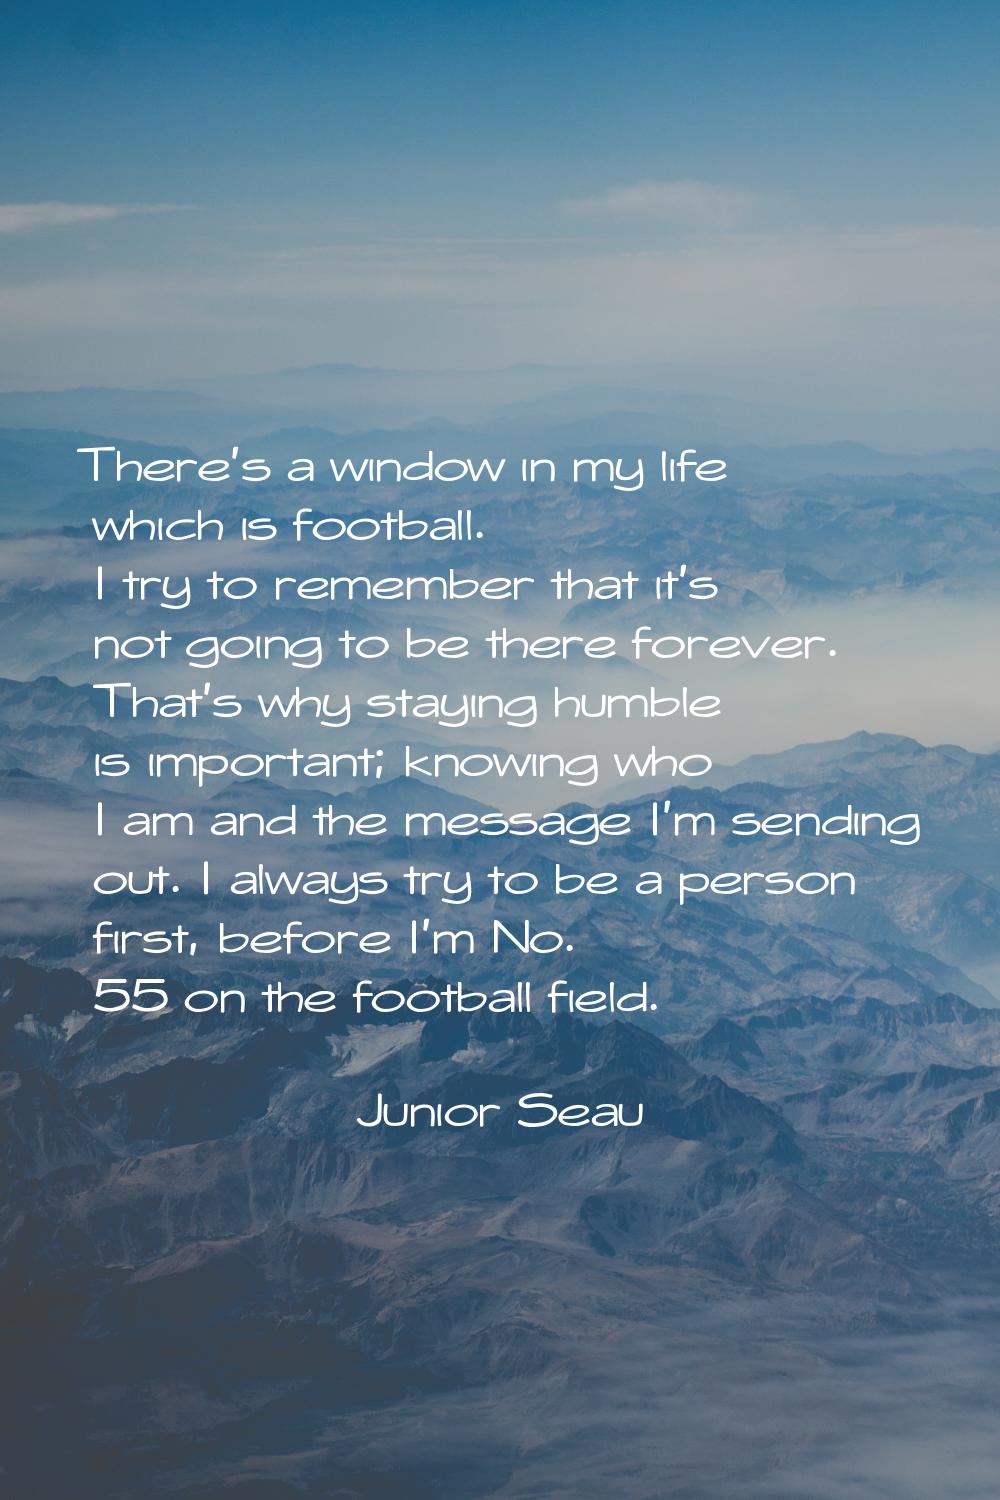 There's a window in my life which is football. I try to remember that it's not going to be there fo